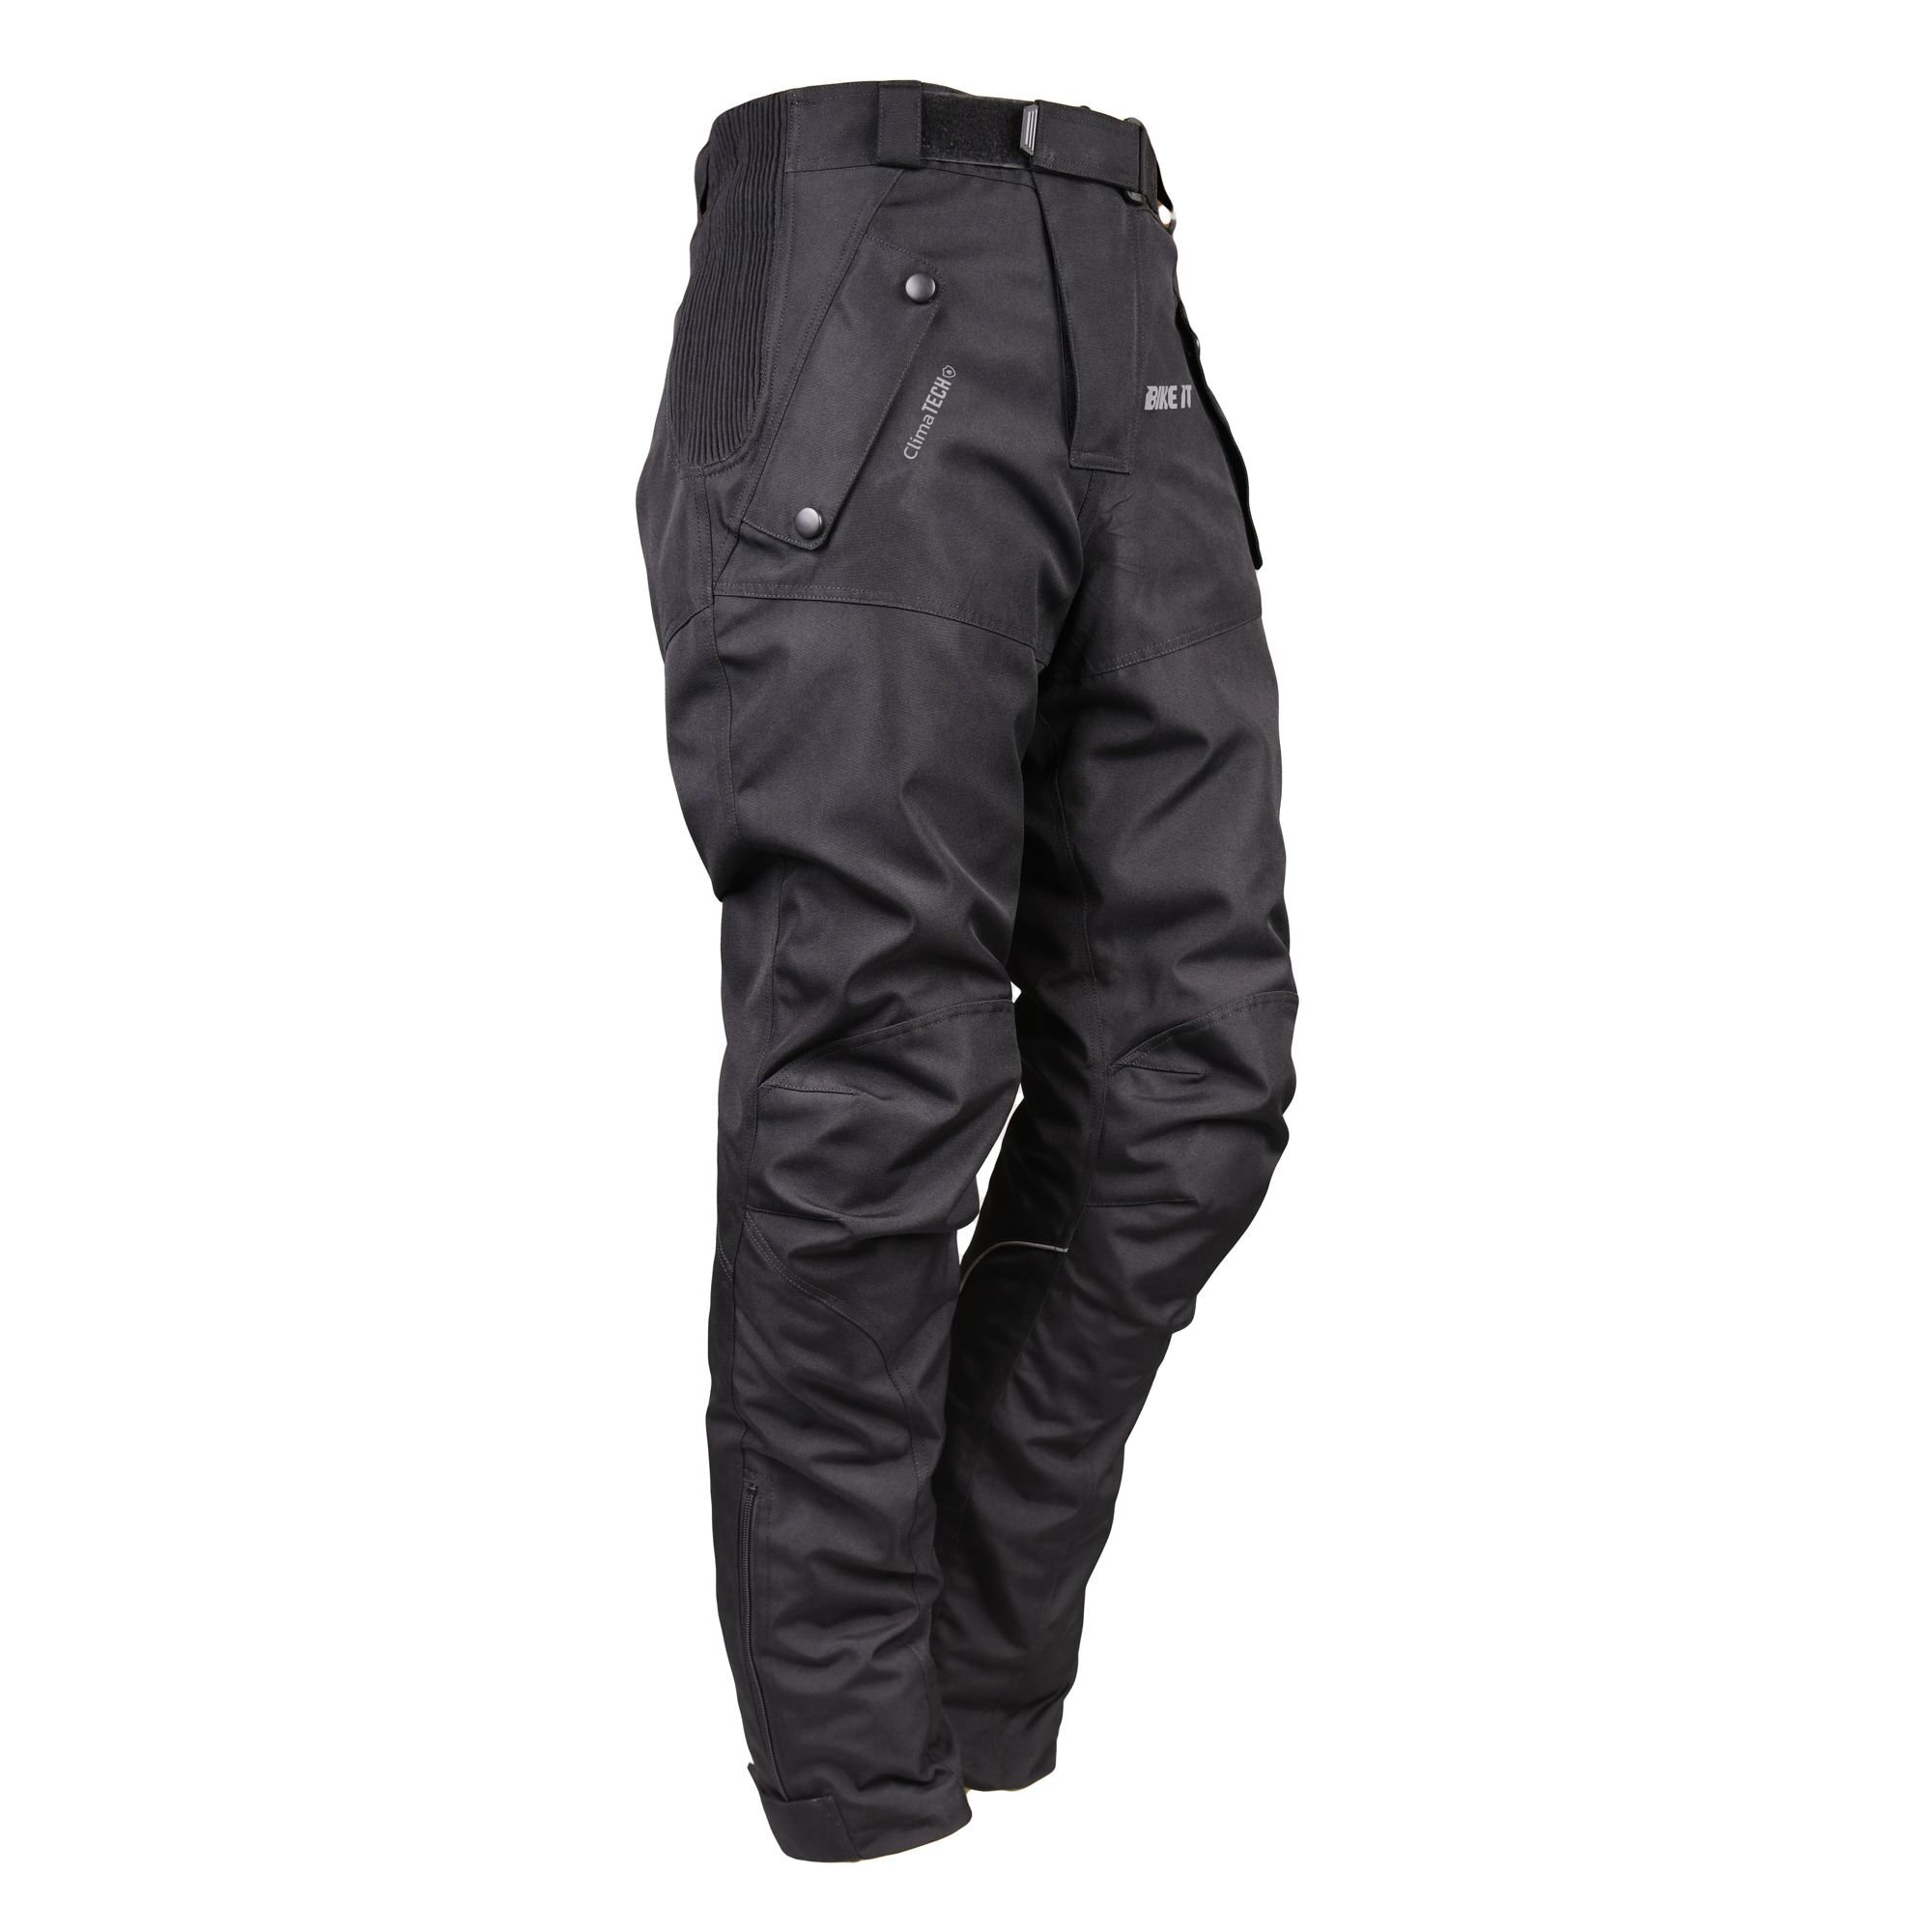 Dainese waterproof motorcycle trousers - review | London Evening Standard |  Evening Standard